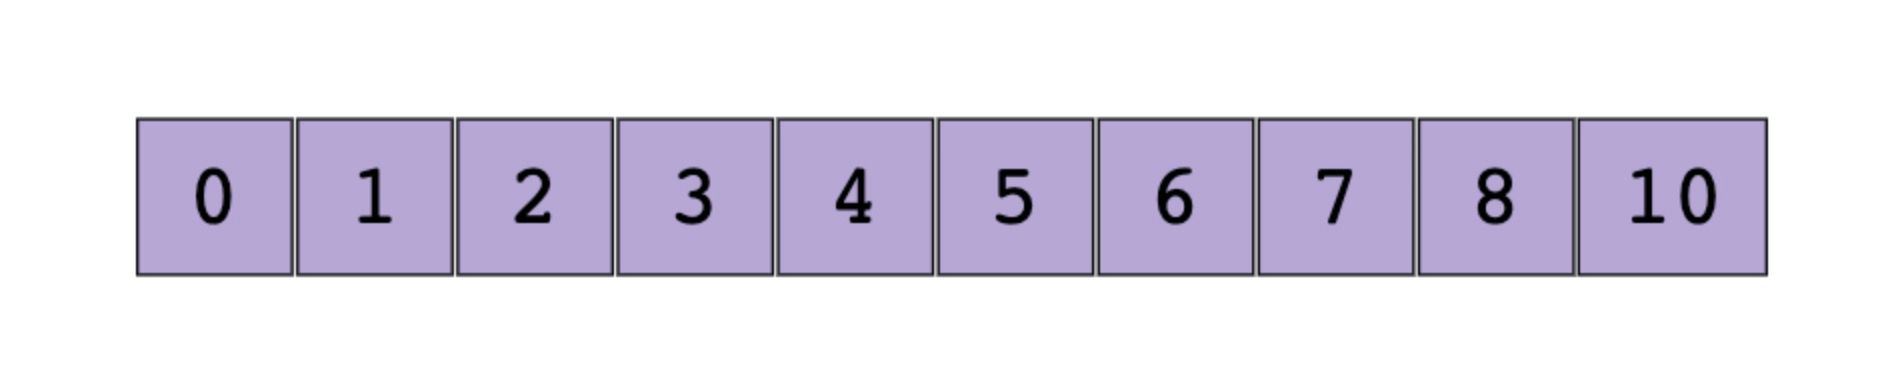 An array of sorted integers